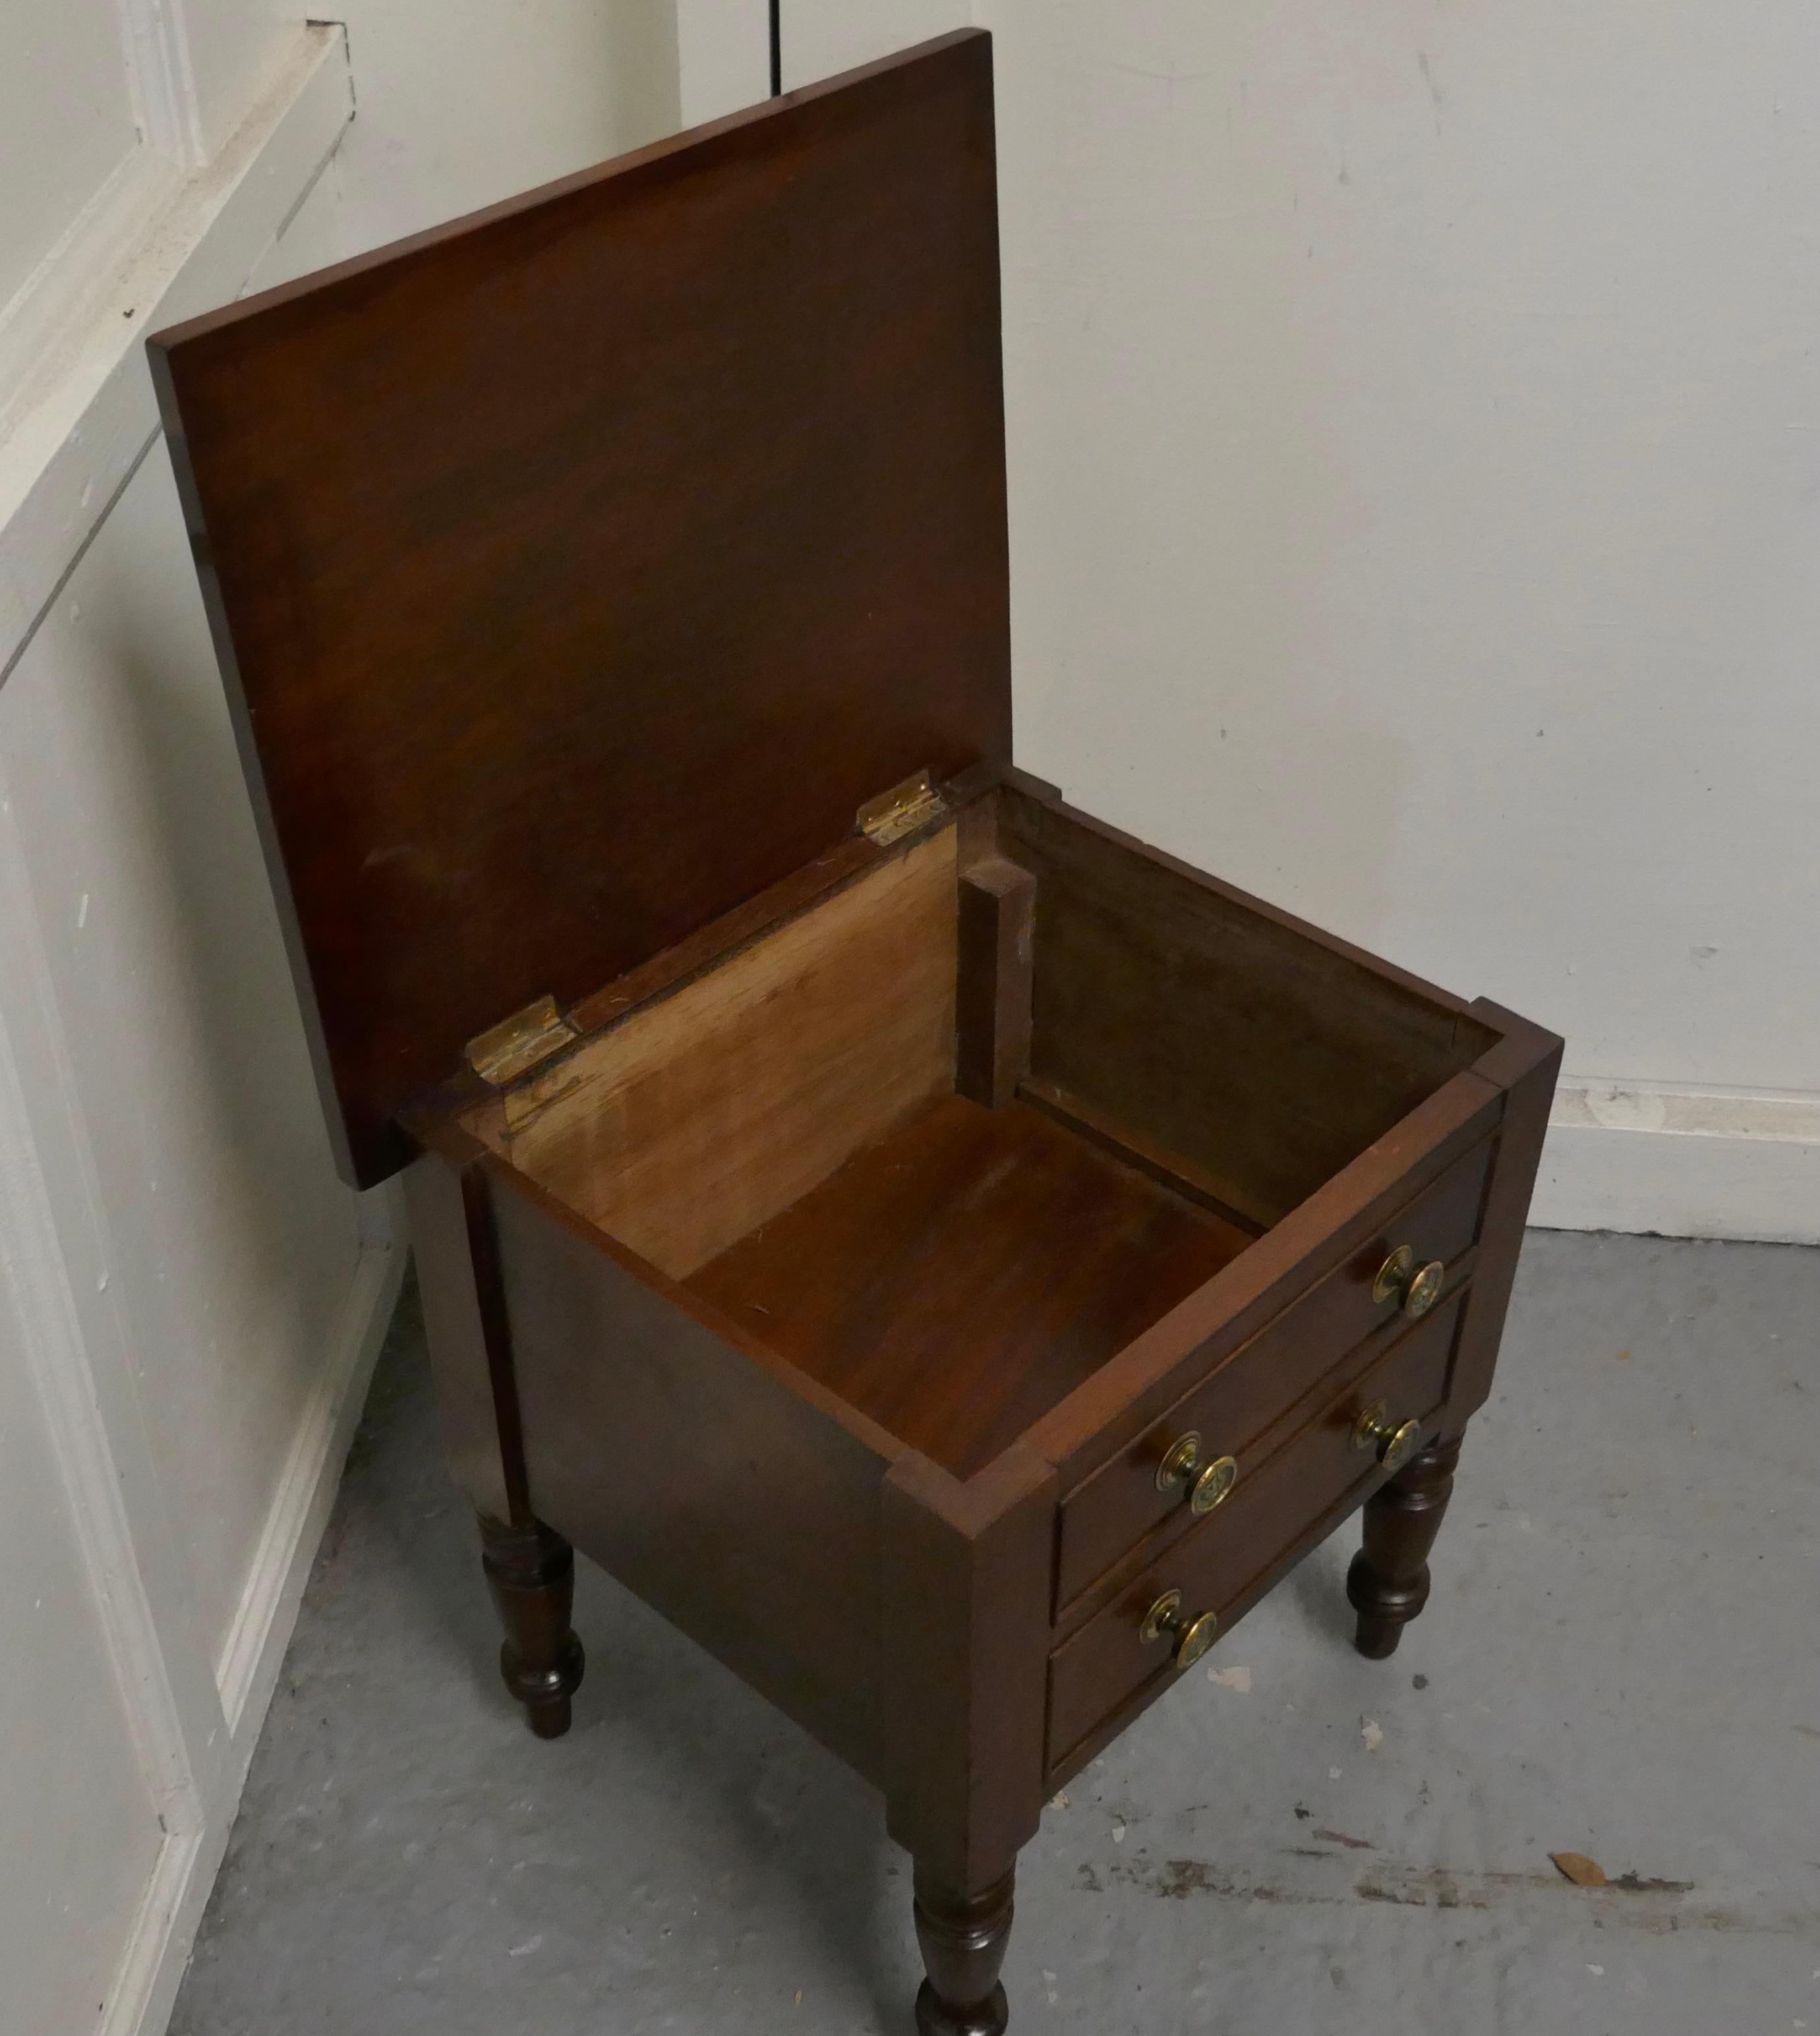 Mahogany occasional table with storage compartment

This is a neat cabinet, it has 2 fake drawers to the front, they disguise a top opening storage box which stands on neat turned legs 
The Table is in good condition it is 18” wide, 18” tall and